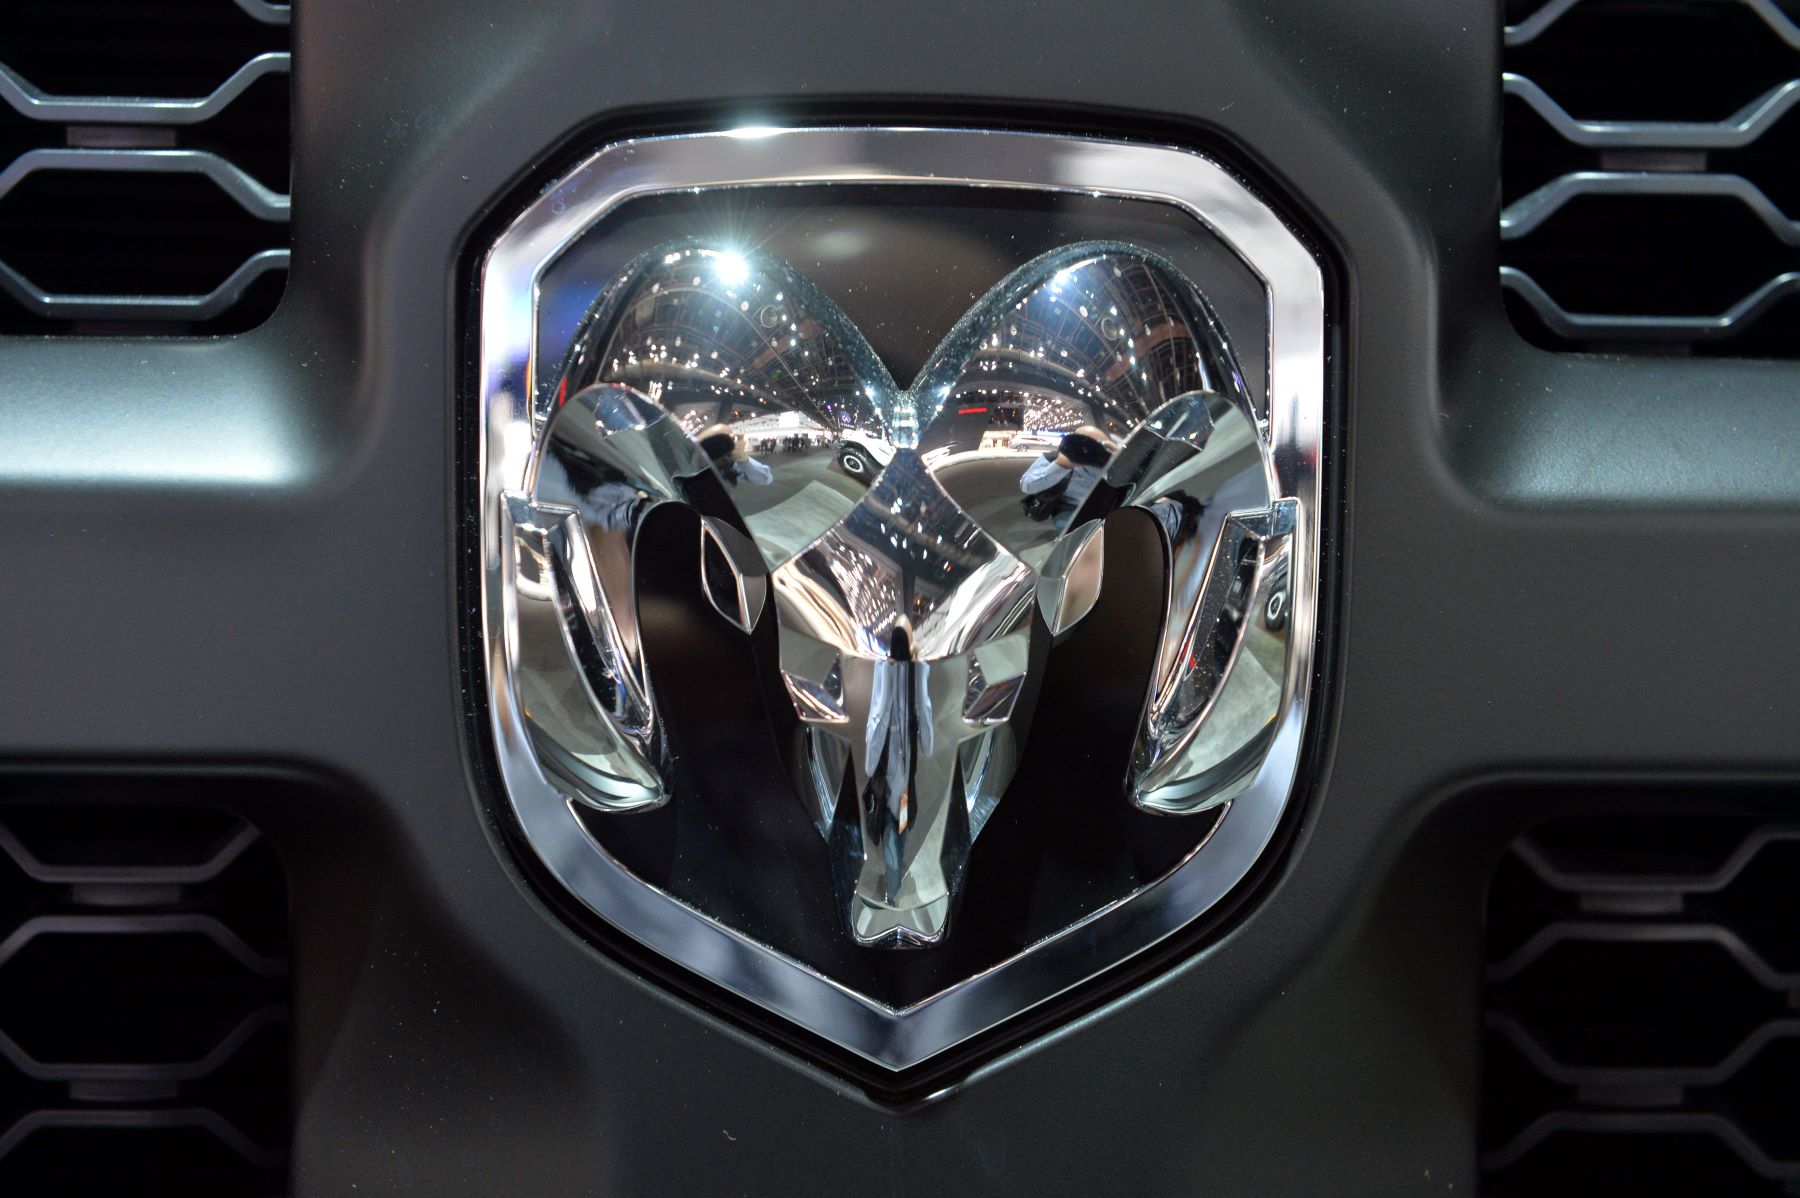 The Ram logo on the front of a truck grille